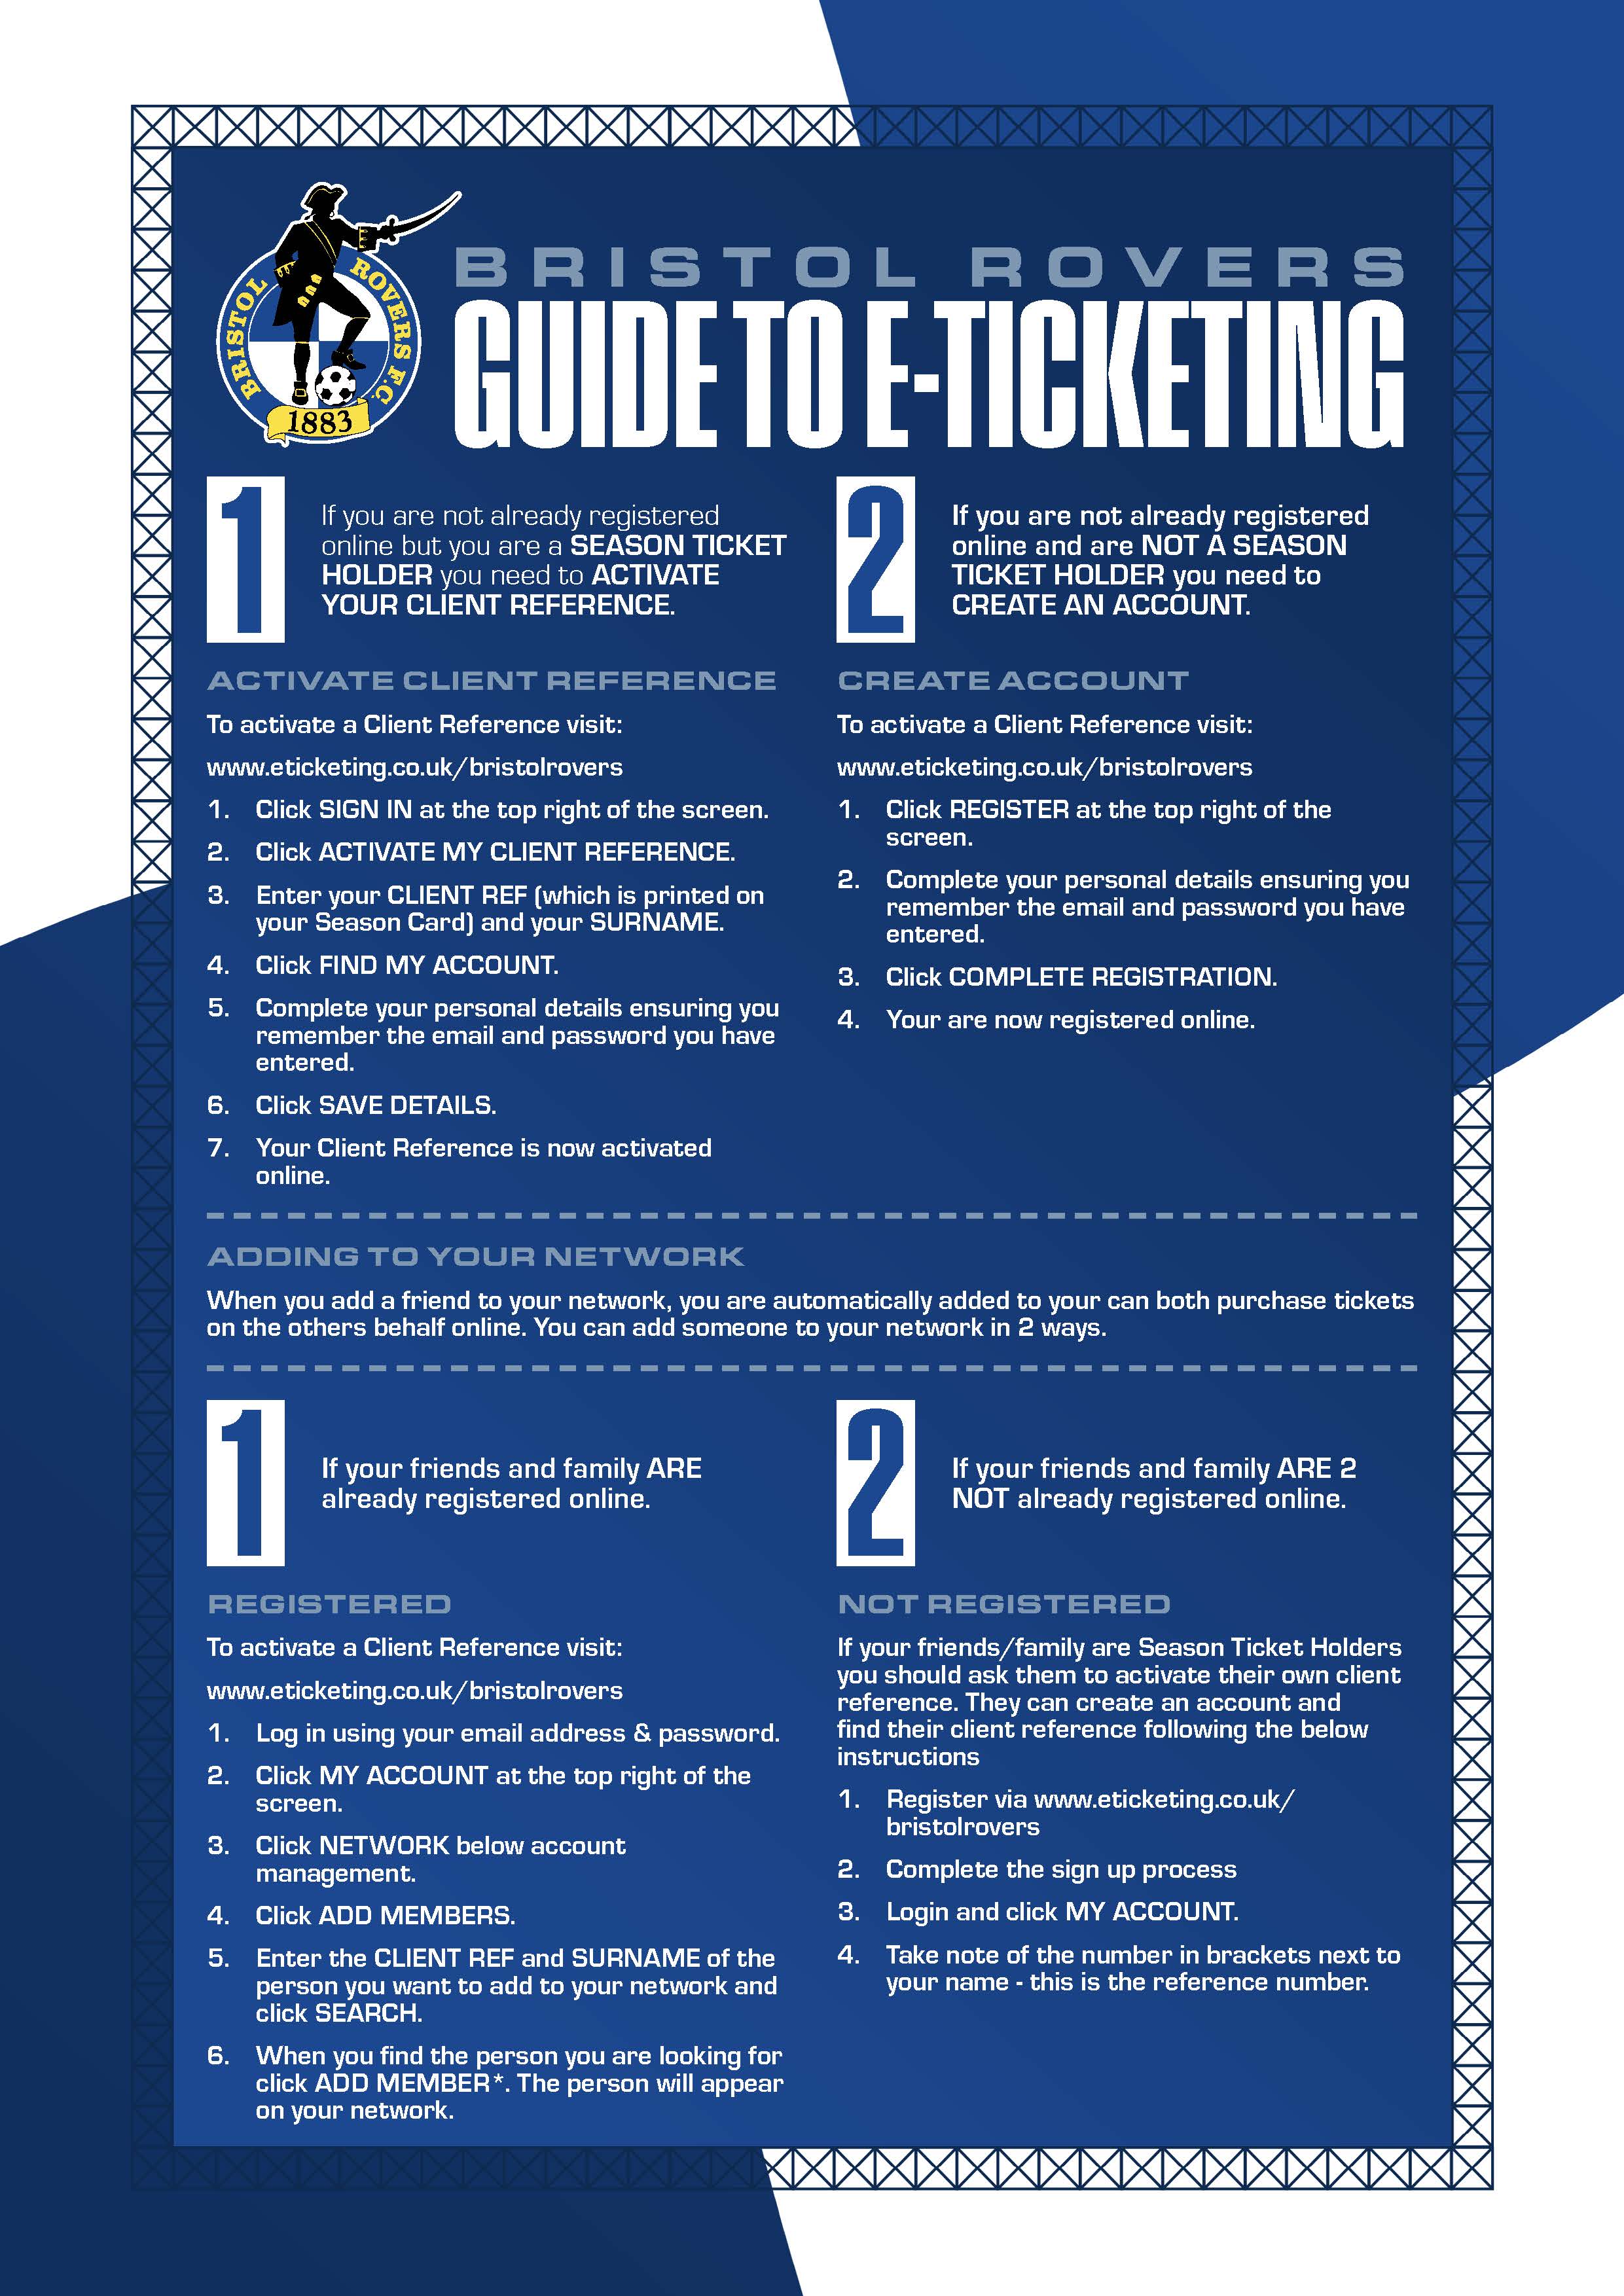 guide to e-ticketing one